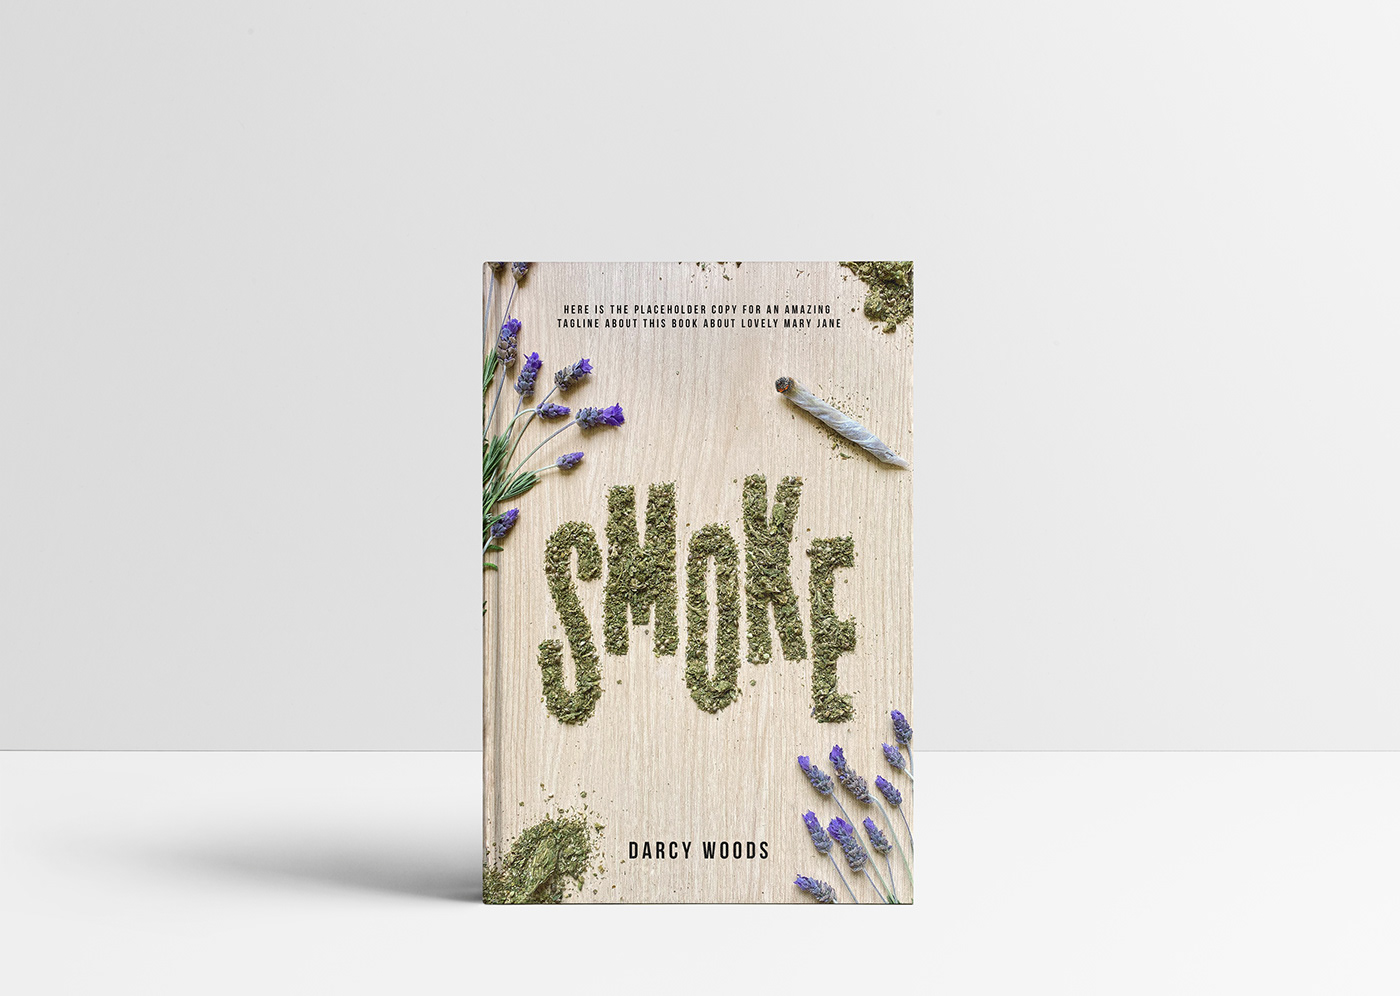 book cover design green Joint lettering marijuana smoke weed